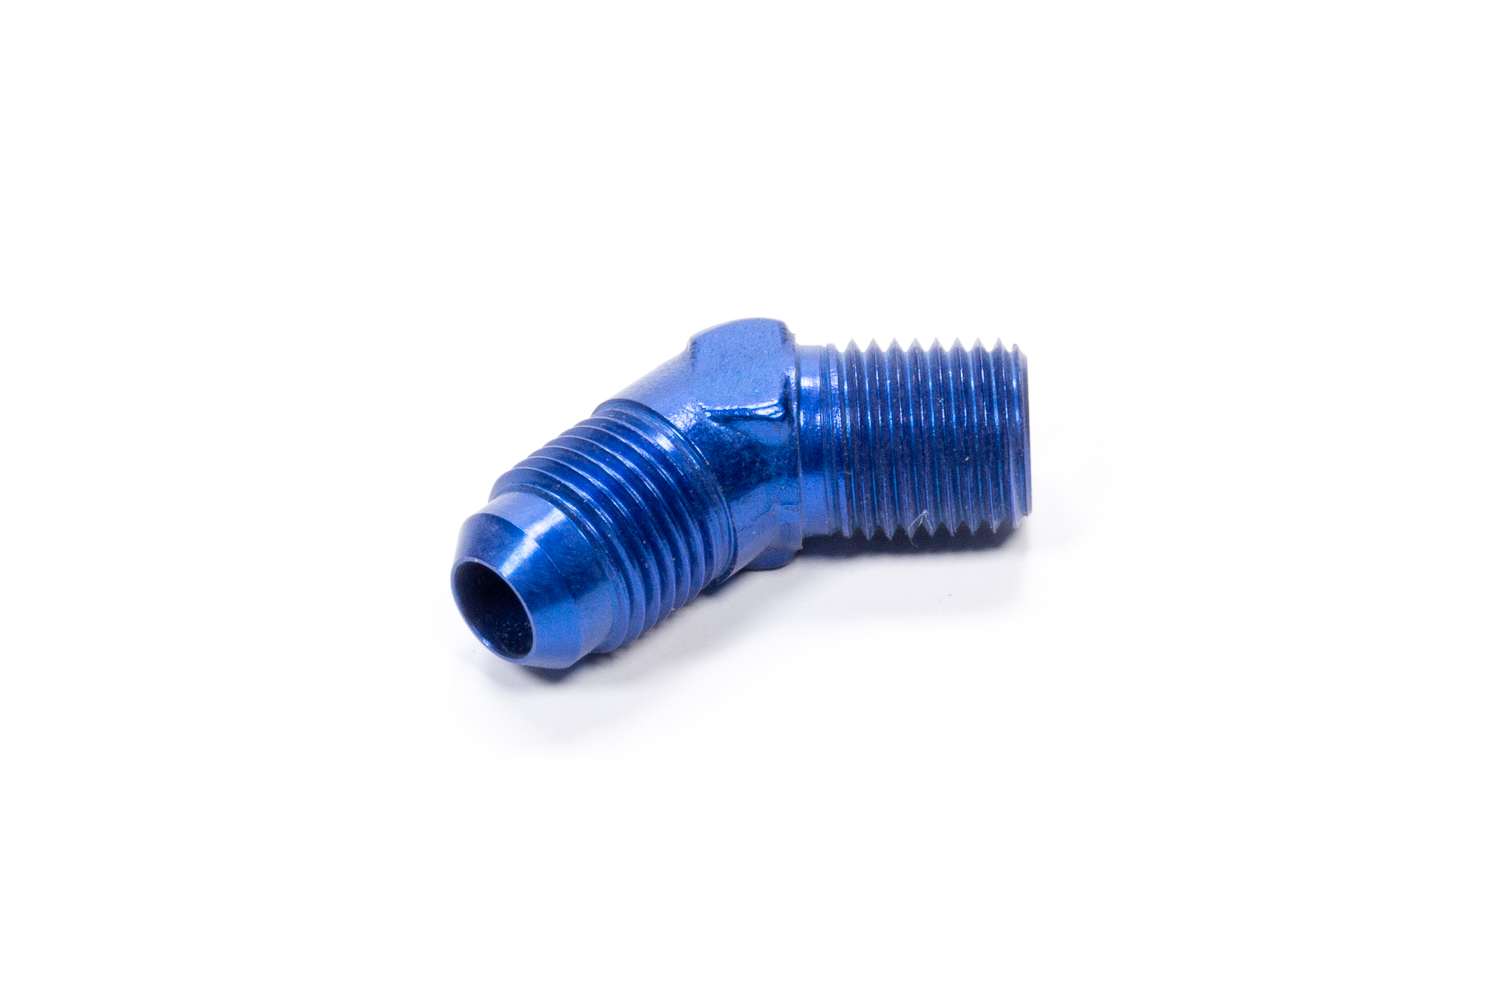 Fragola 482306 Fitting, Adapter, 45 Degree, 6 AN Male to 1/4 in NPT Male, Aluminum, Blue Anodized, Each